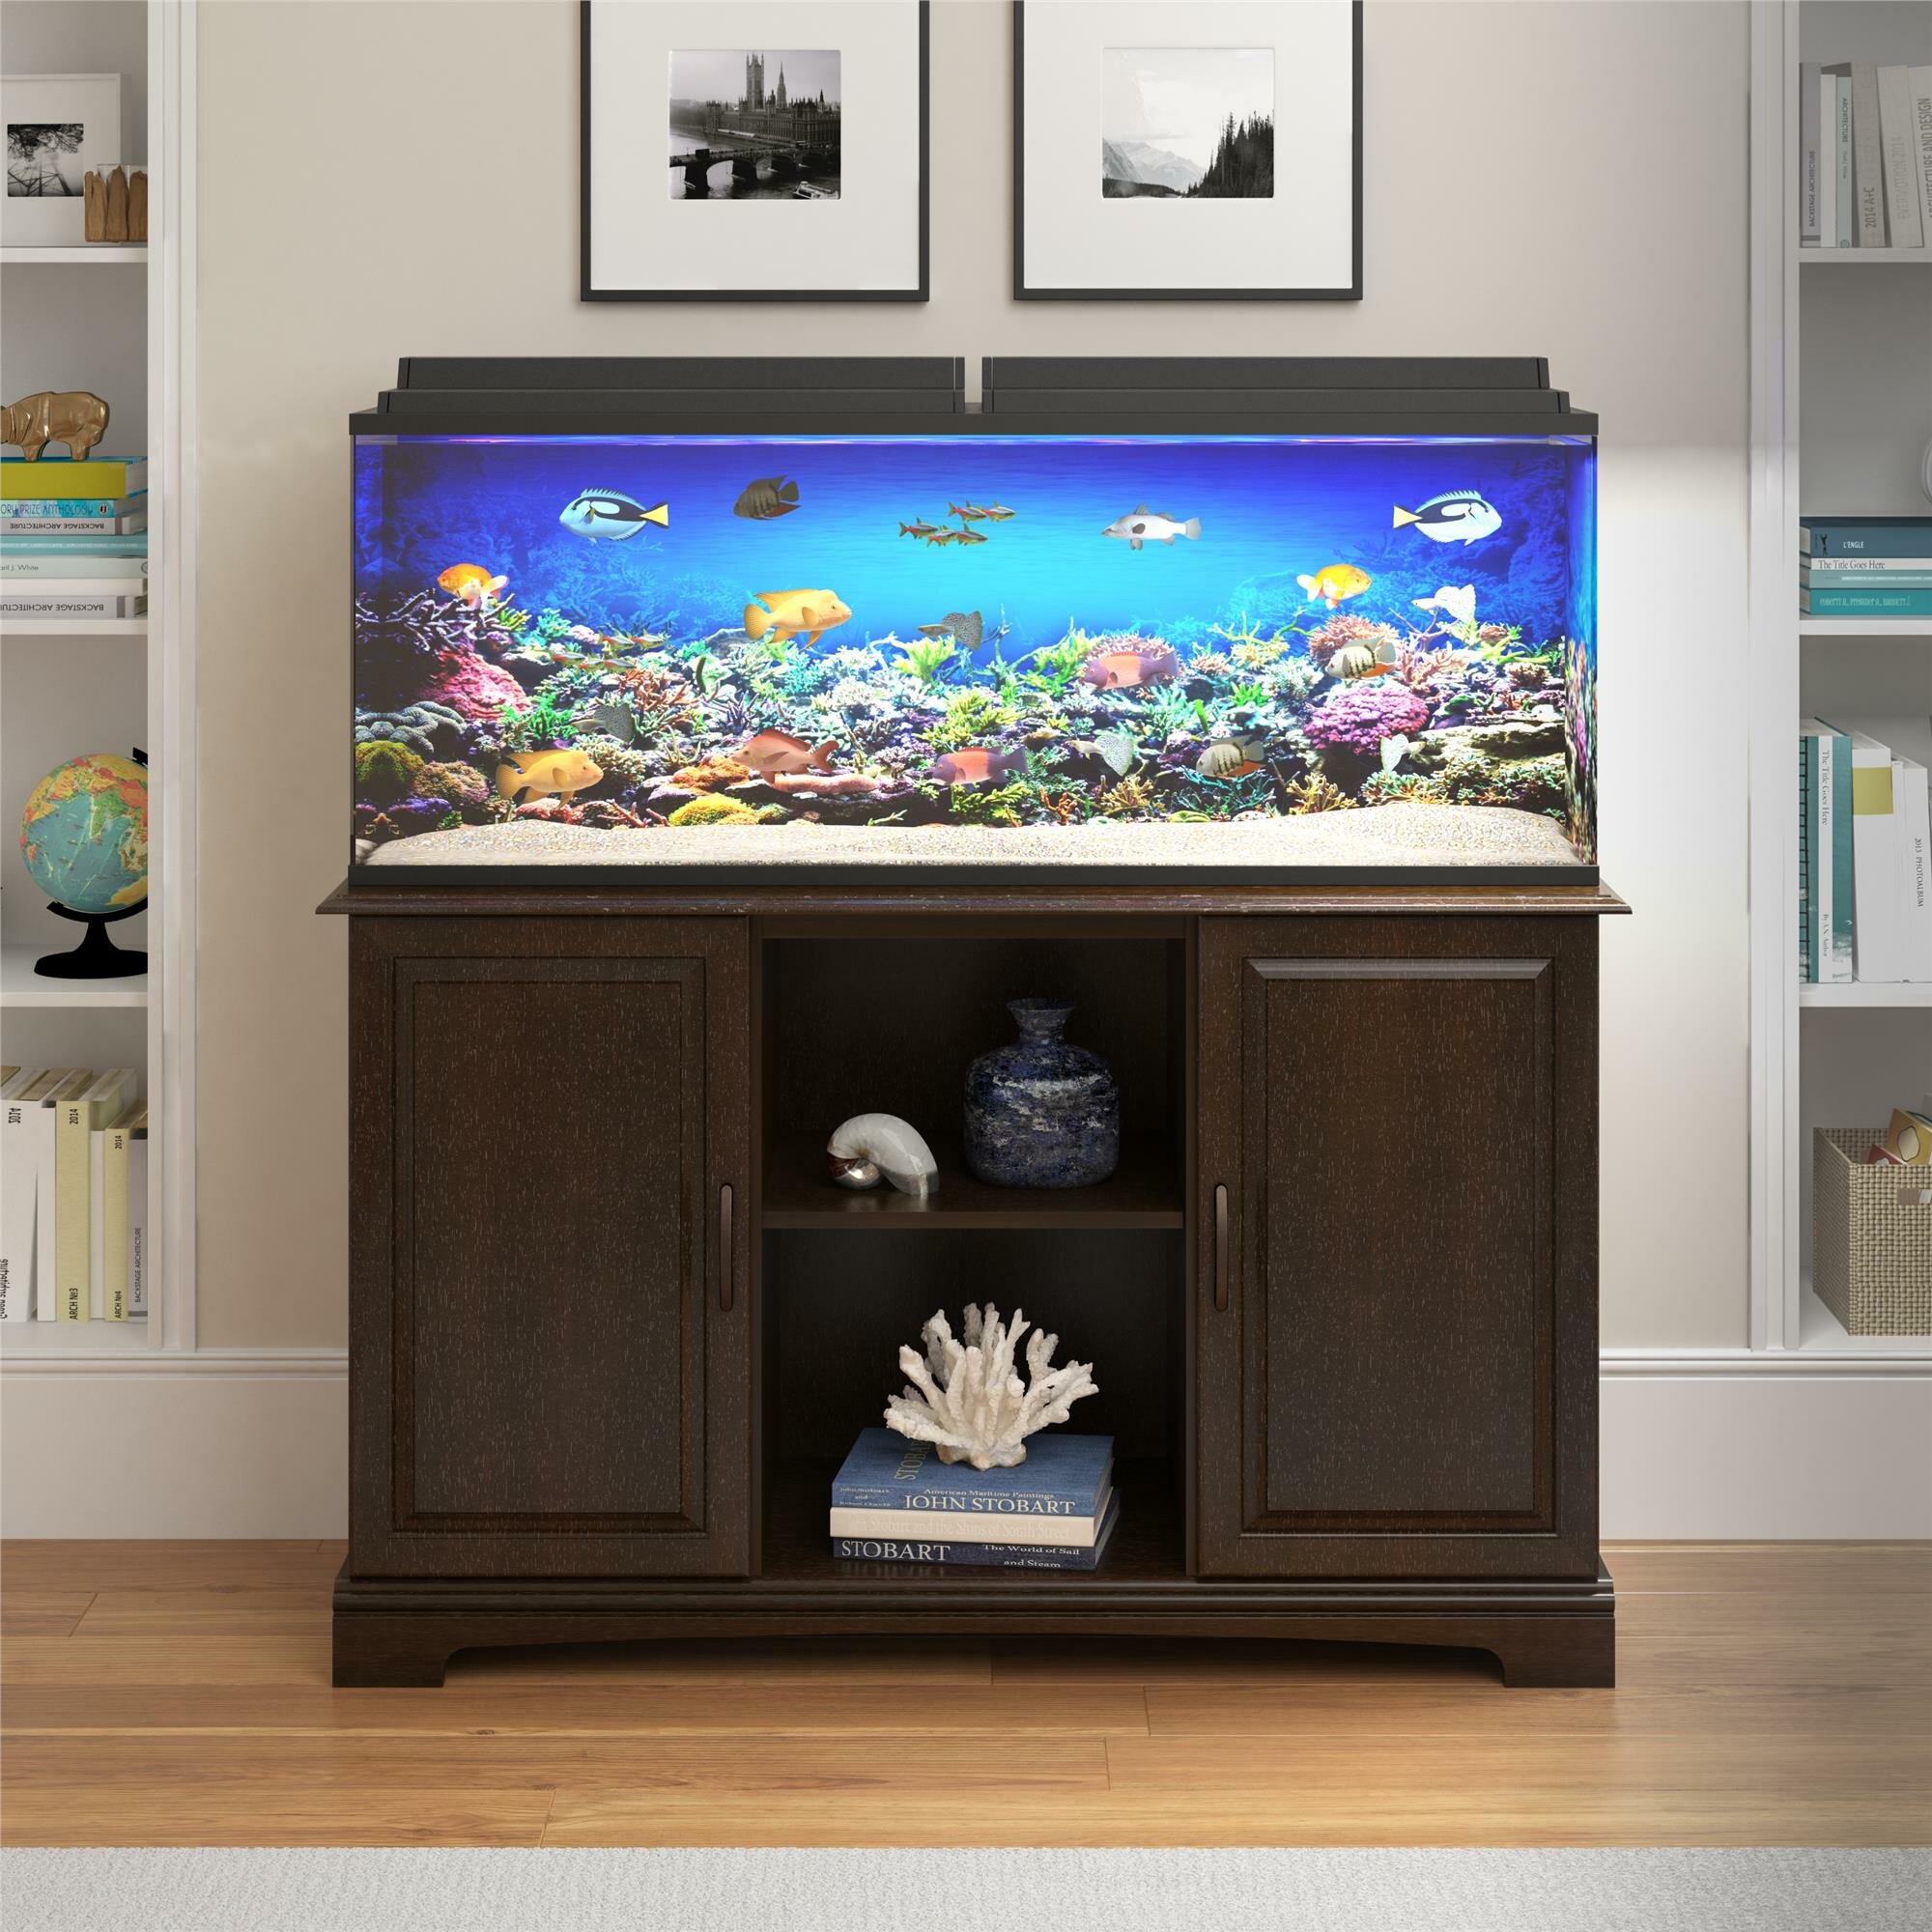 How Much Does a 75 Gallon Fish Tank Weigh 